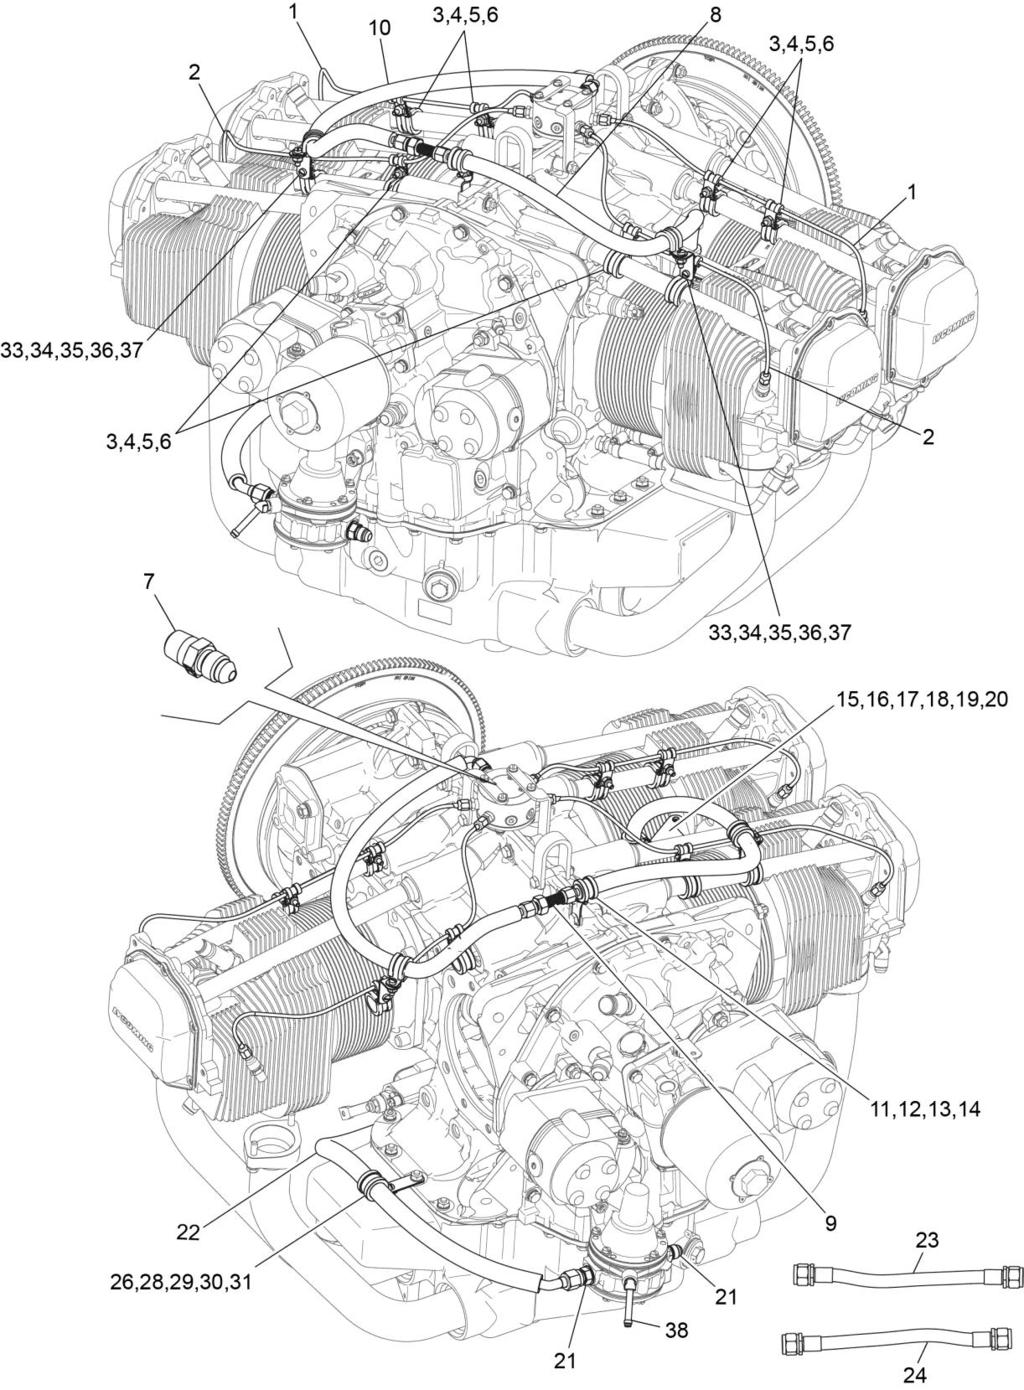 IO-90- Series Engine Illustrated Parts Catalog Figure 24 Fuel Lines, Fuel Hoses, and ttaching Parts